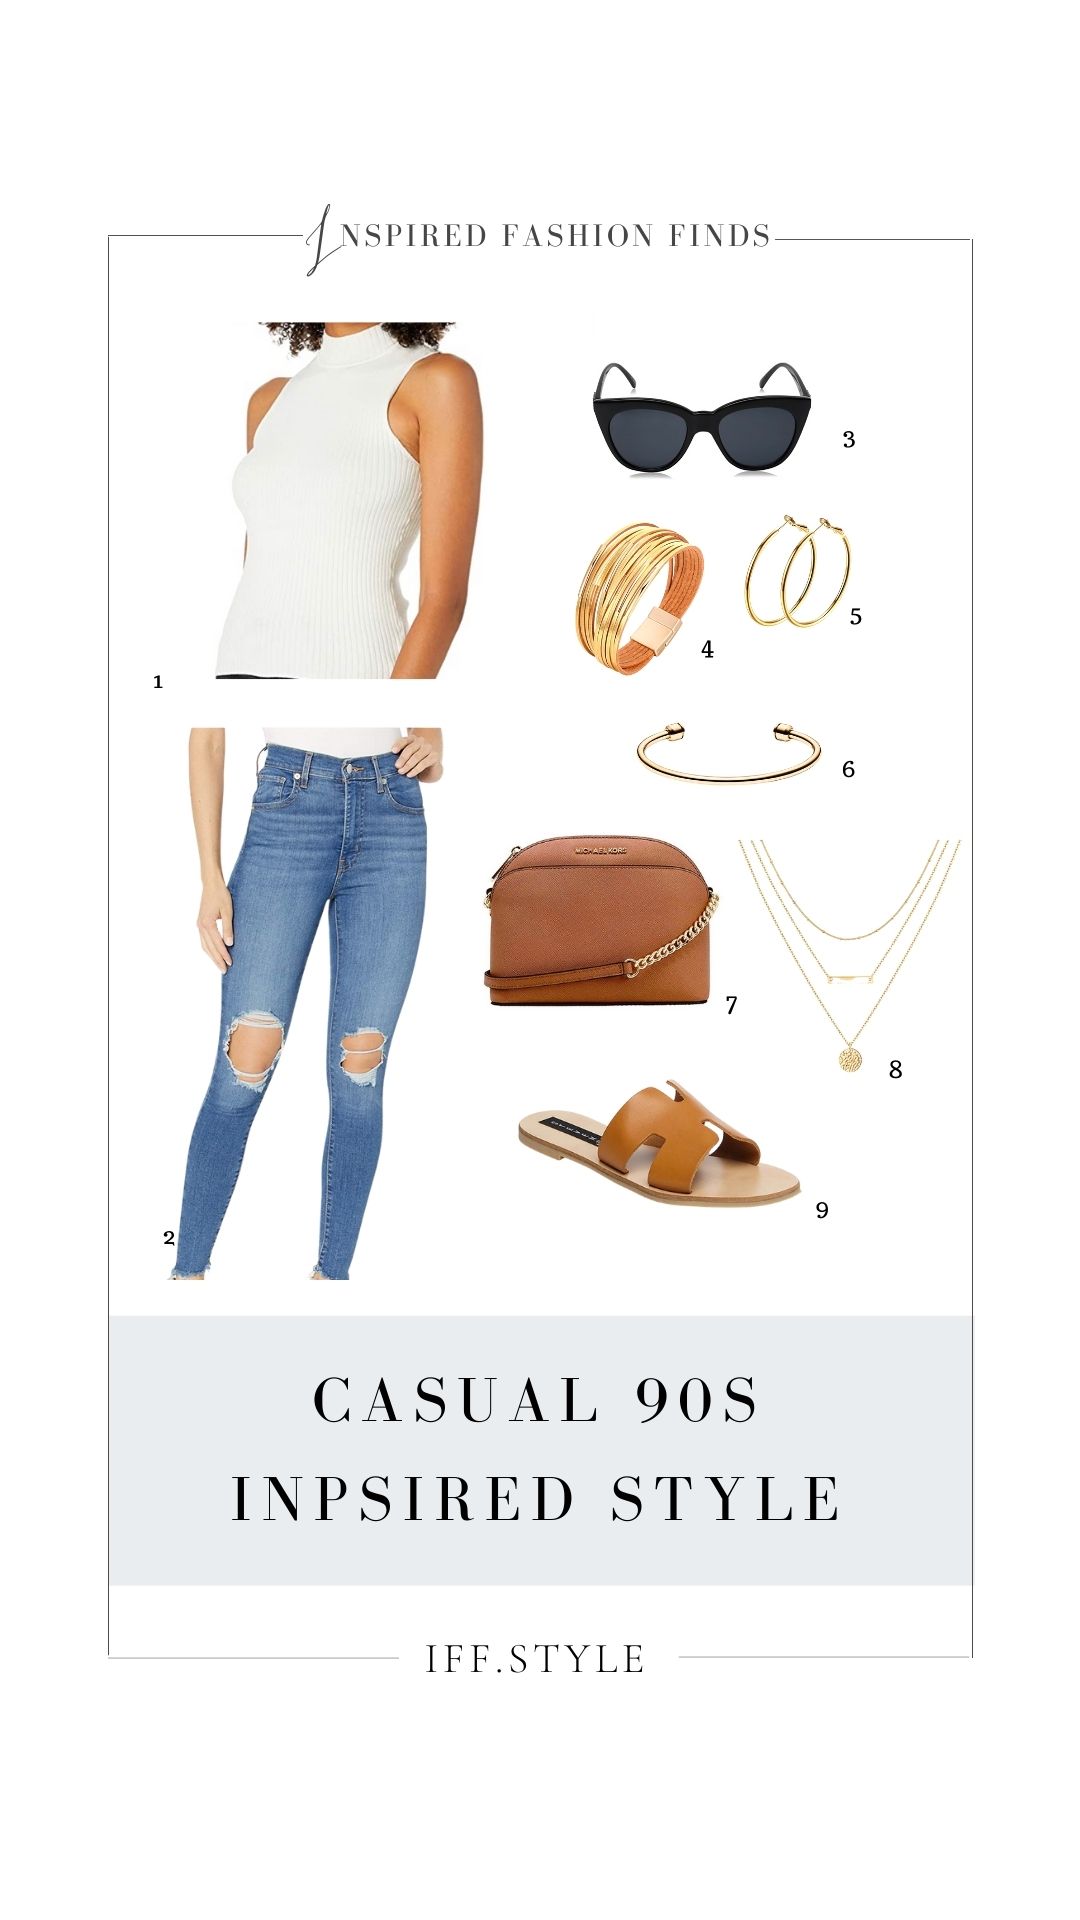 Pinterest Pin-Fashion-Casual-90s inspired everyday style